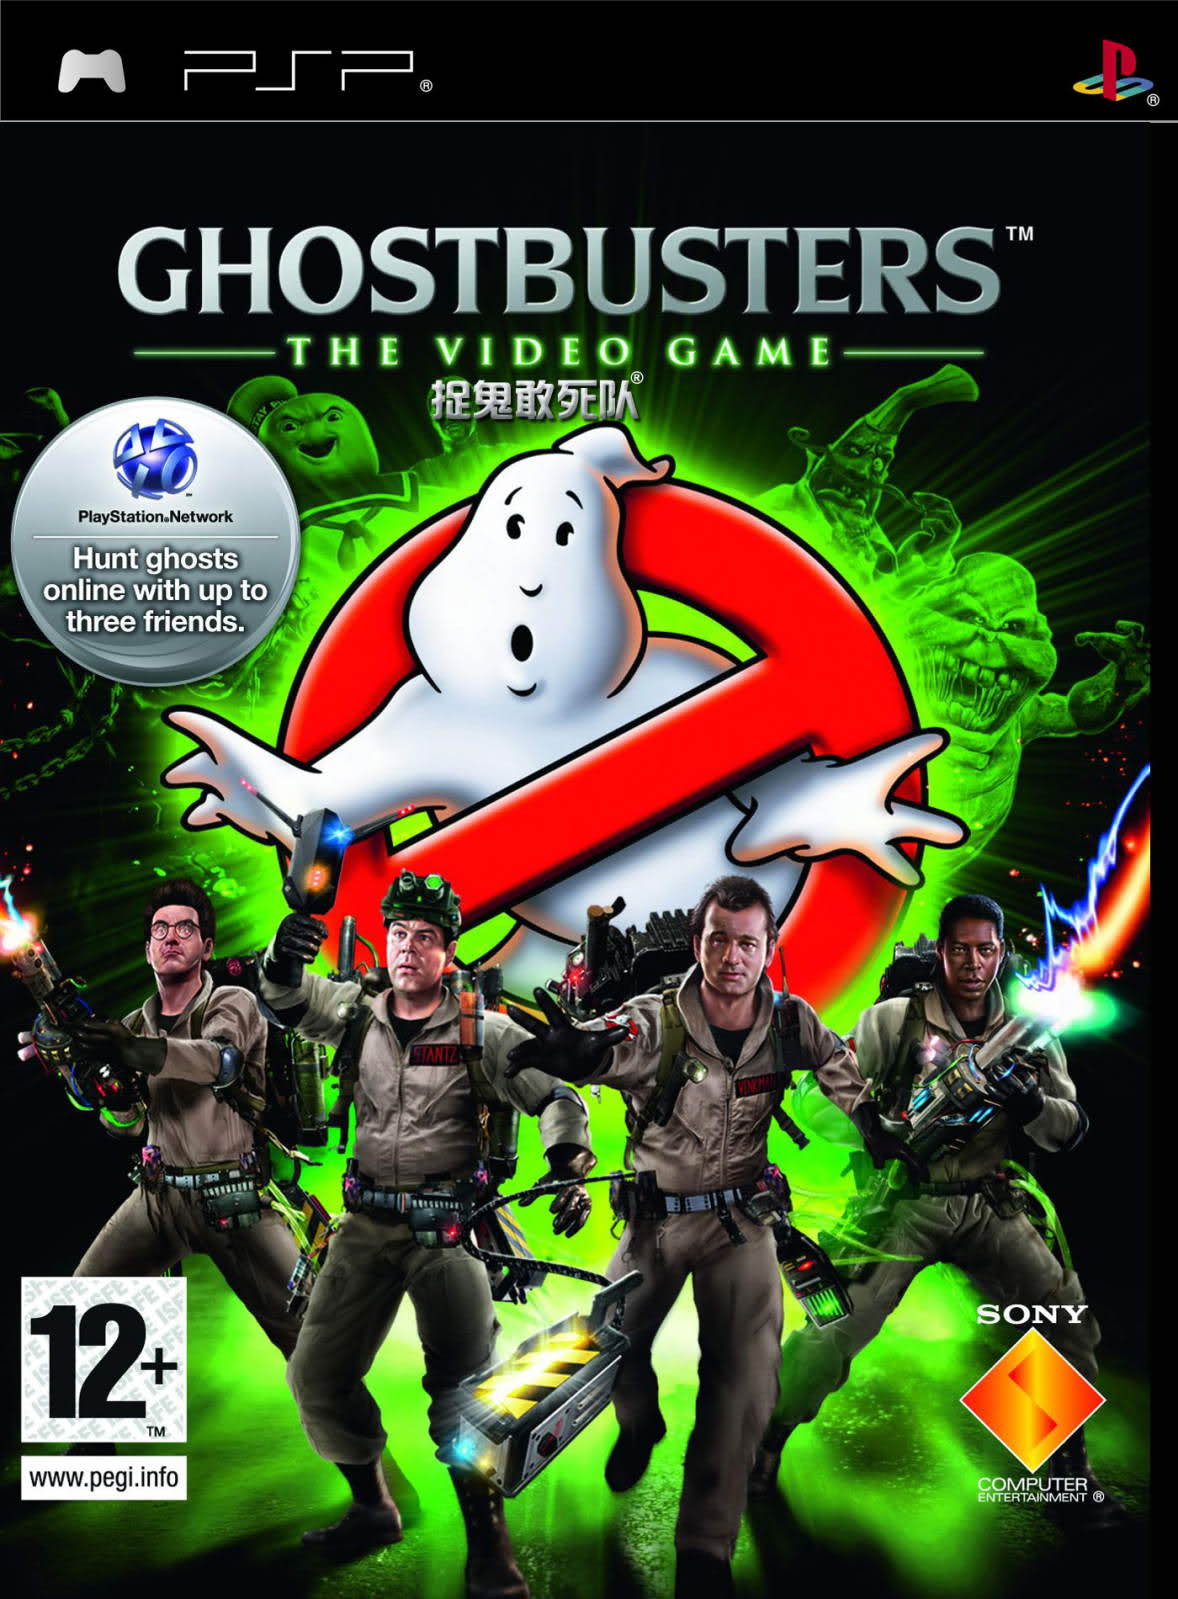 ghostbuster video game